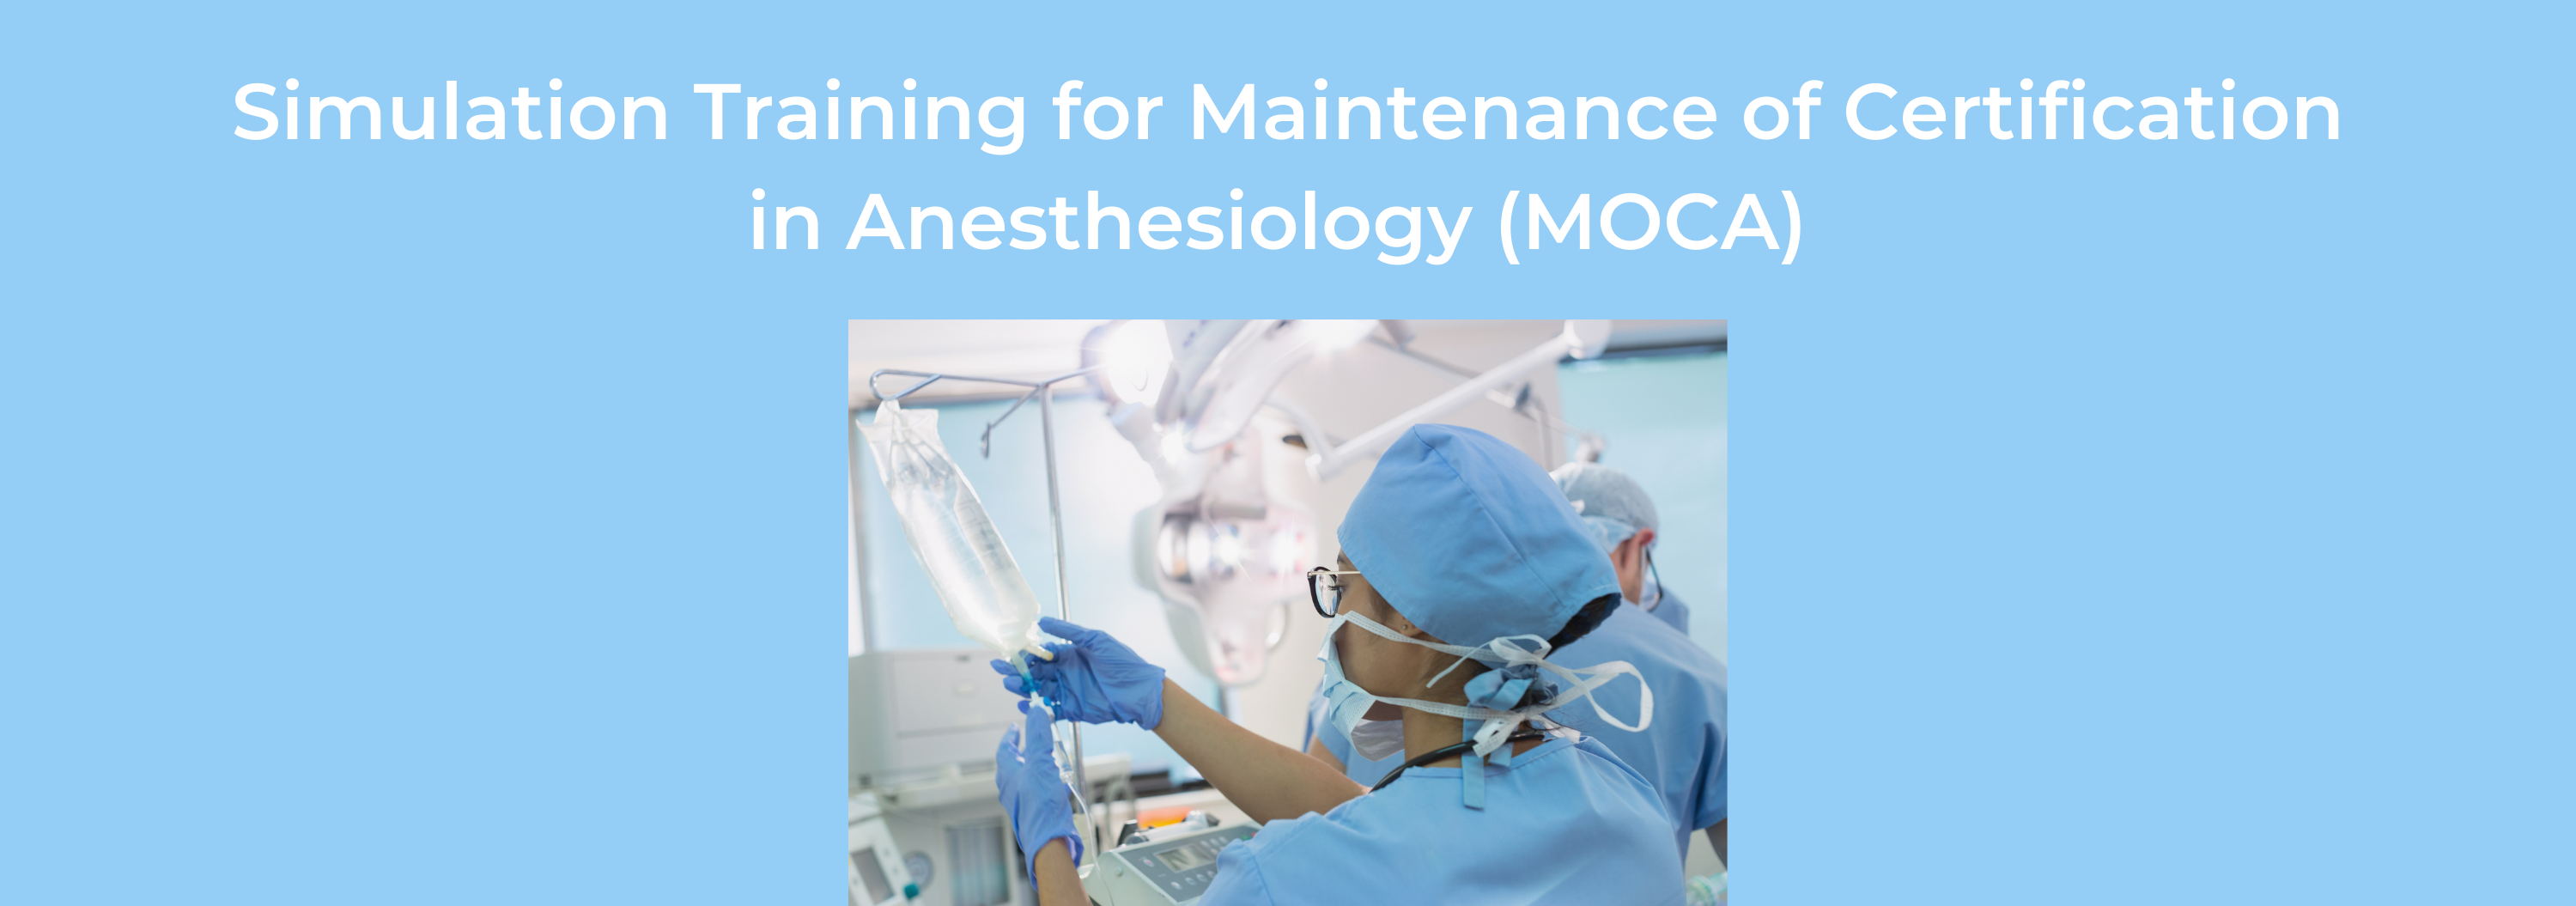 Simulation Training for Maintenance of Certification in Anesthesiology-December 5, 2022 Banner